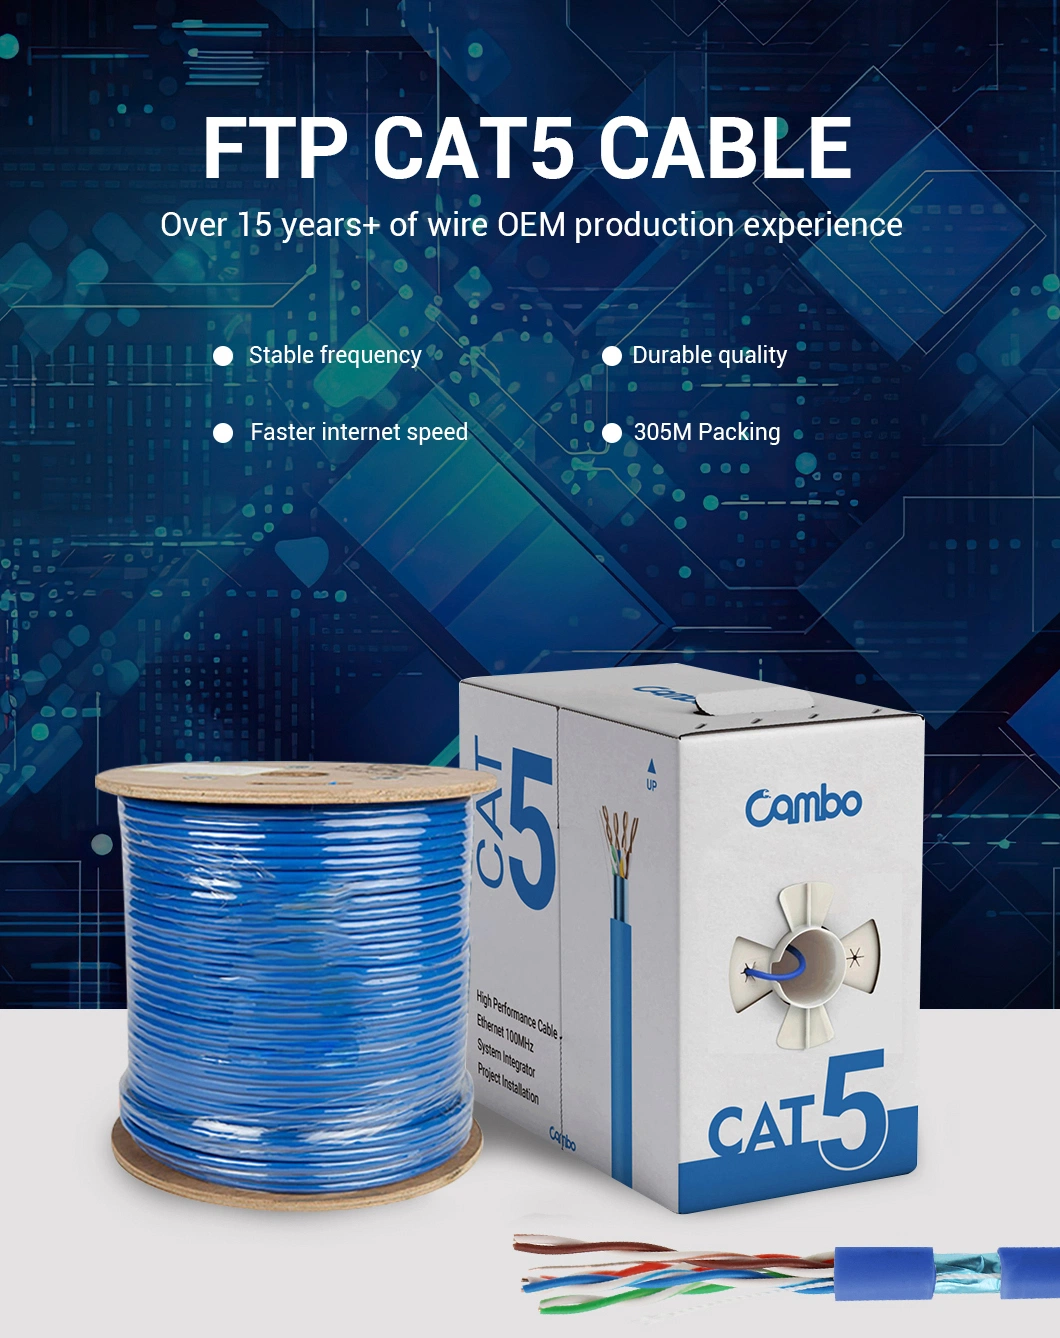 PVC Cambo 4pr 24AWG Indoor Outdoor Network FTP Cat5e Cable with CE